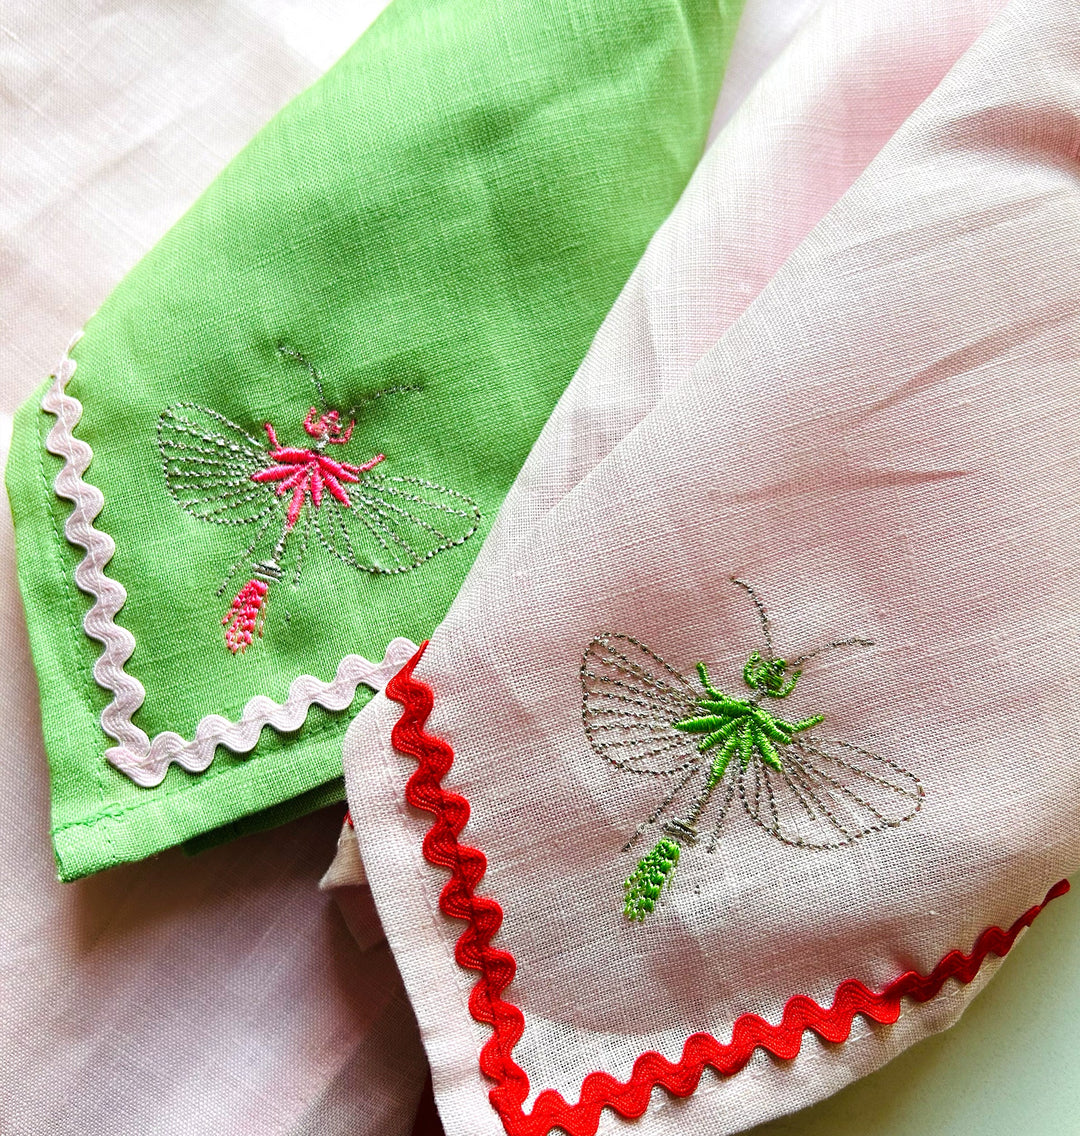 Dragonfly Embroidered Linen Napkins